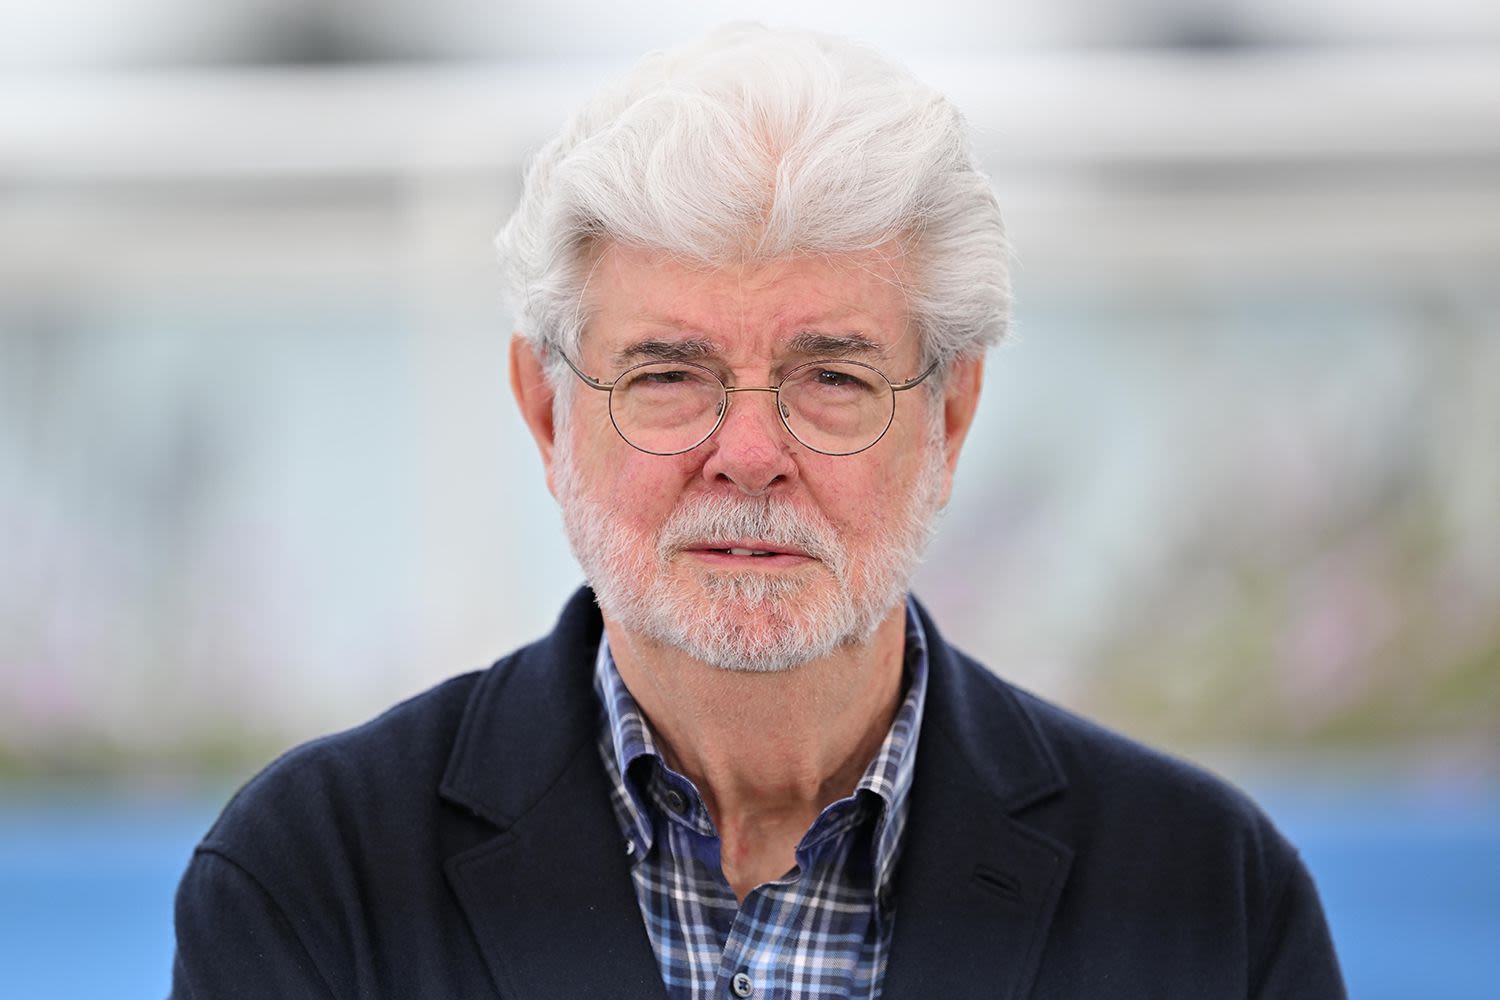 George Lucas Defends “Star Wars” from Criticisms That 'It's All White Men': 'Most of the People Are Aliens!'